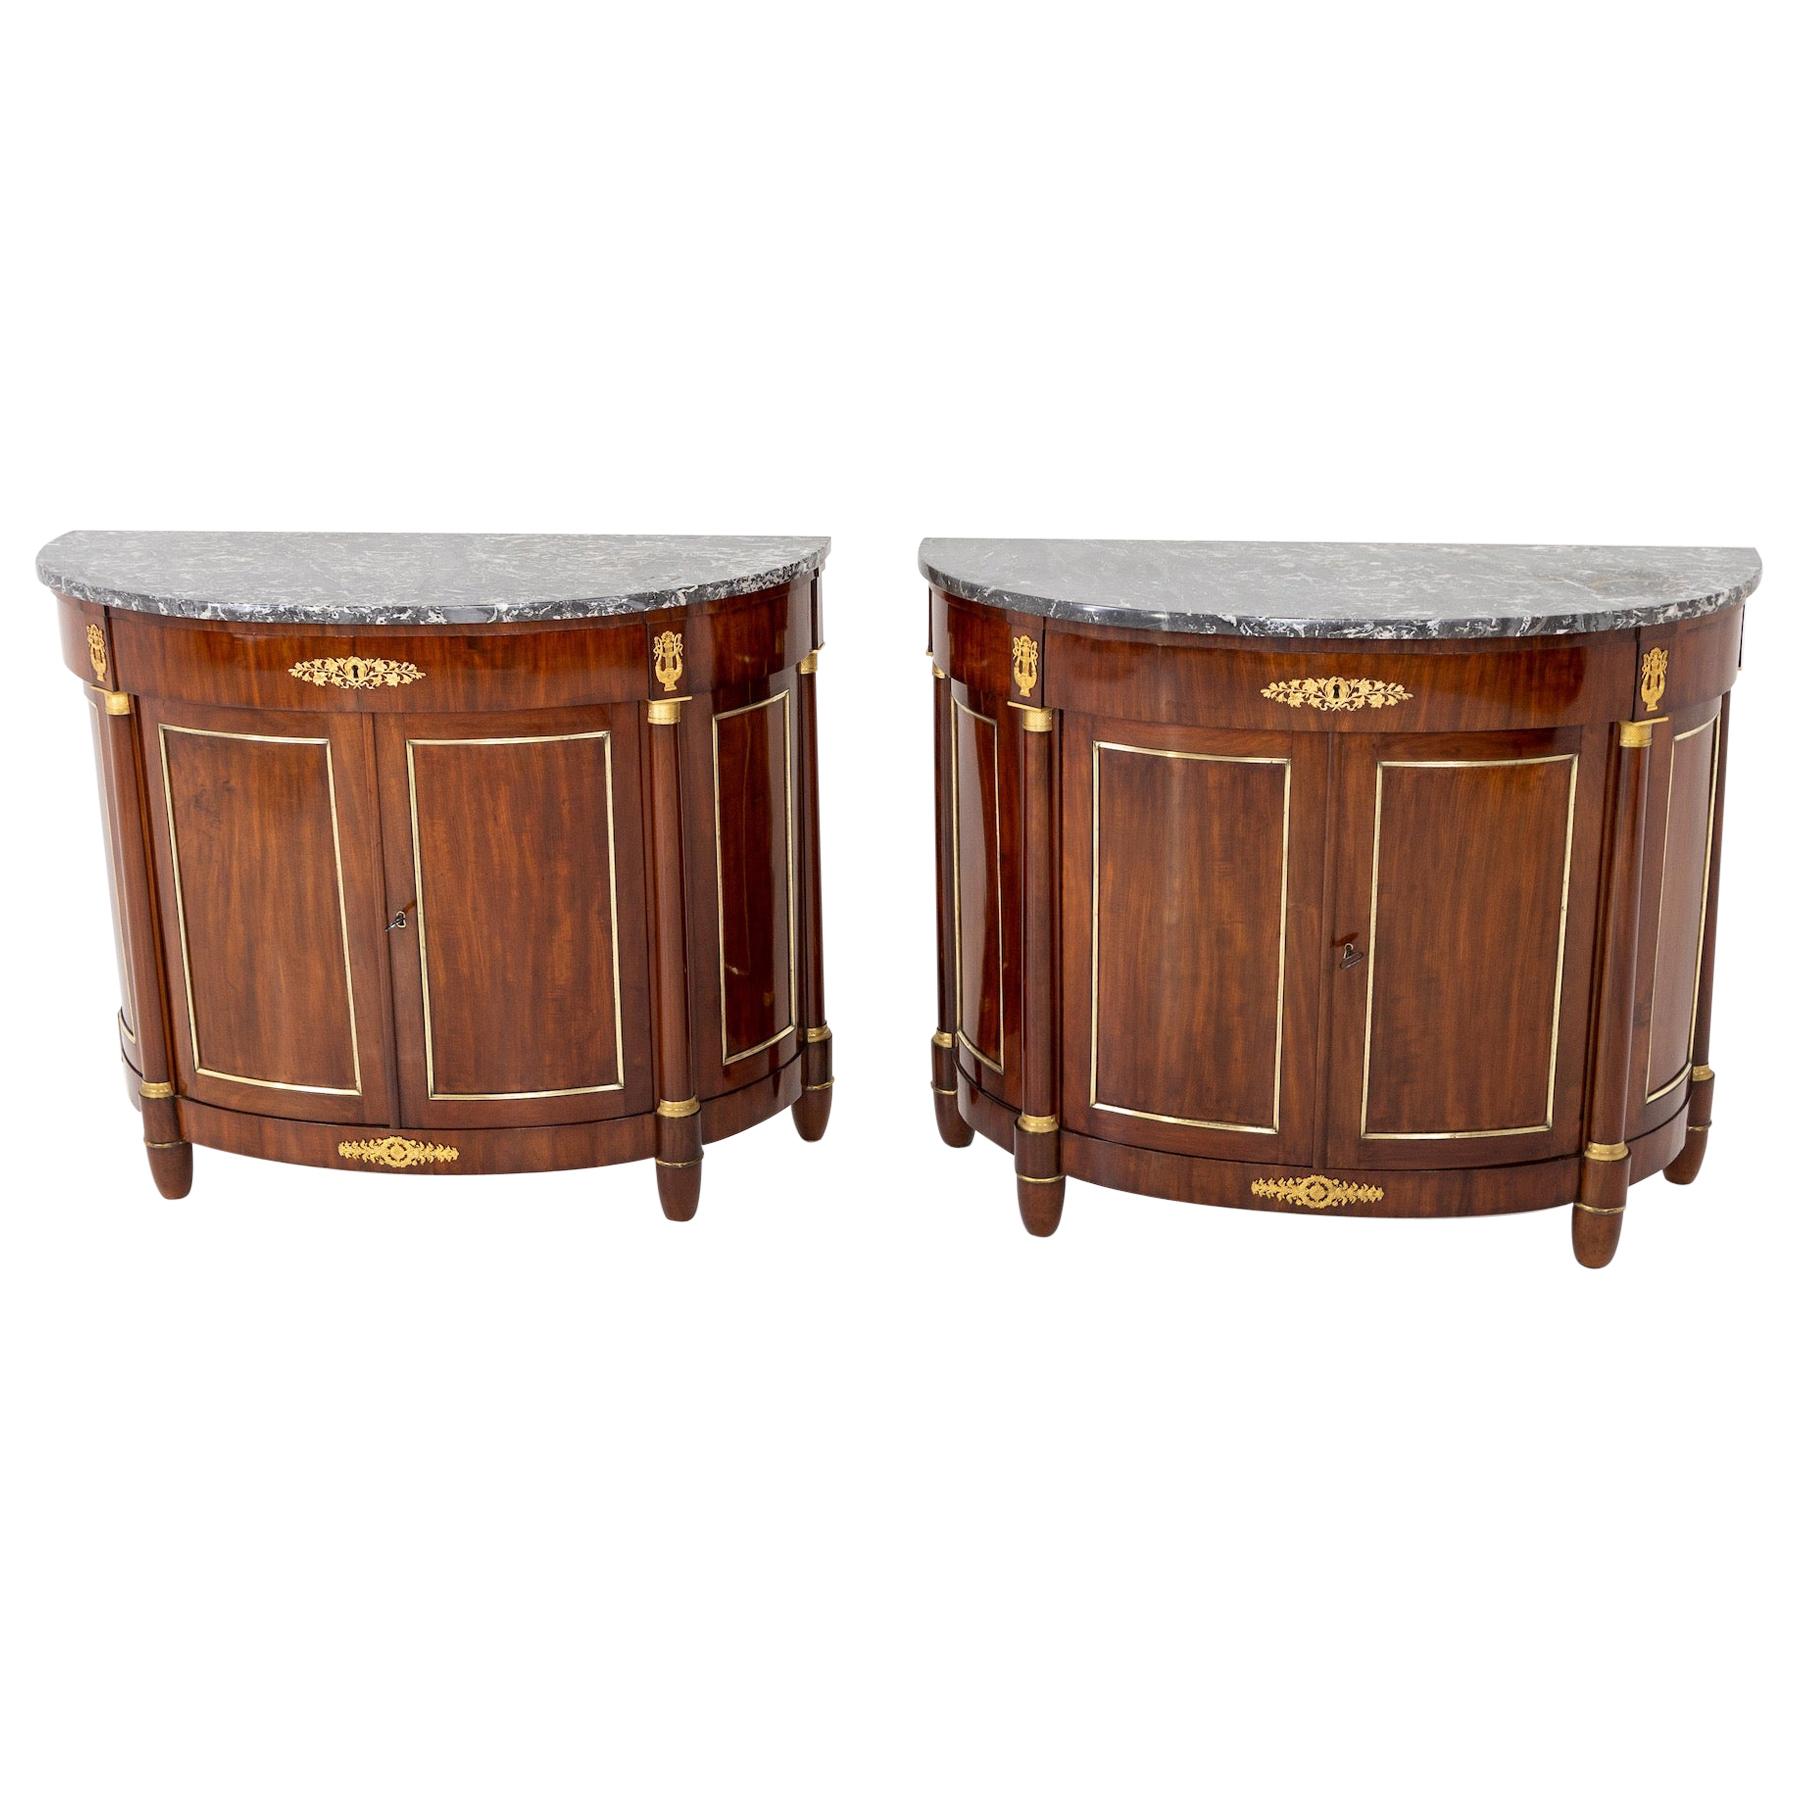 Empire Demi Lune Sideboards, France, c. 1810